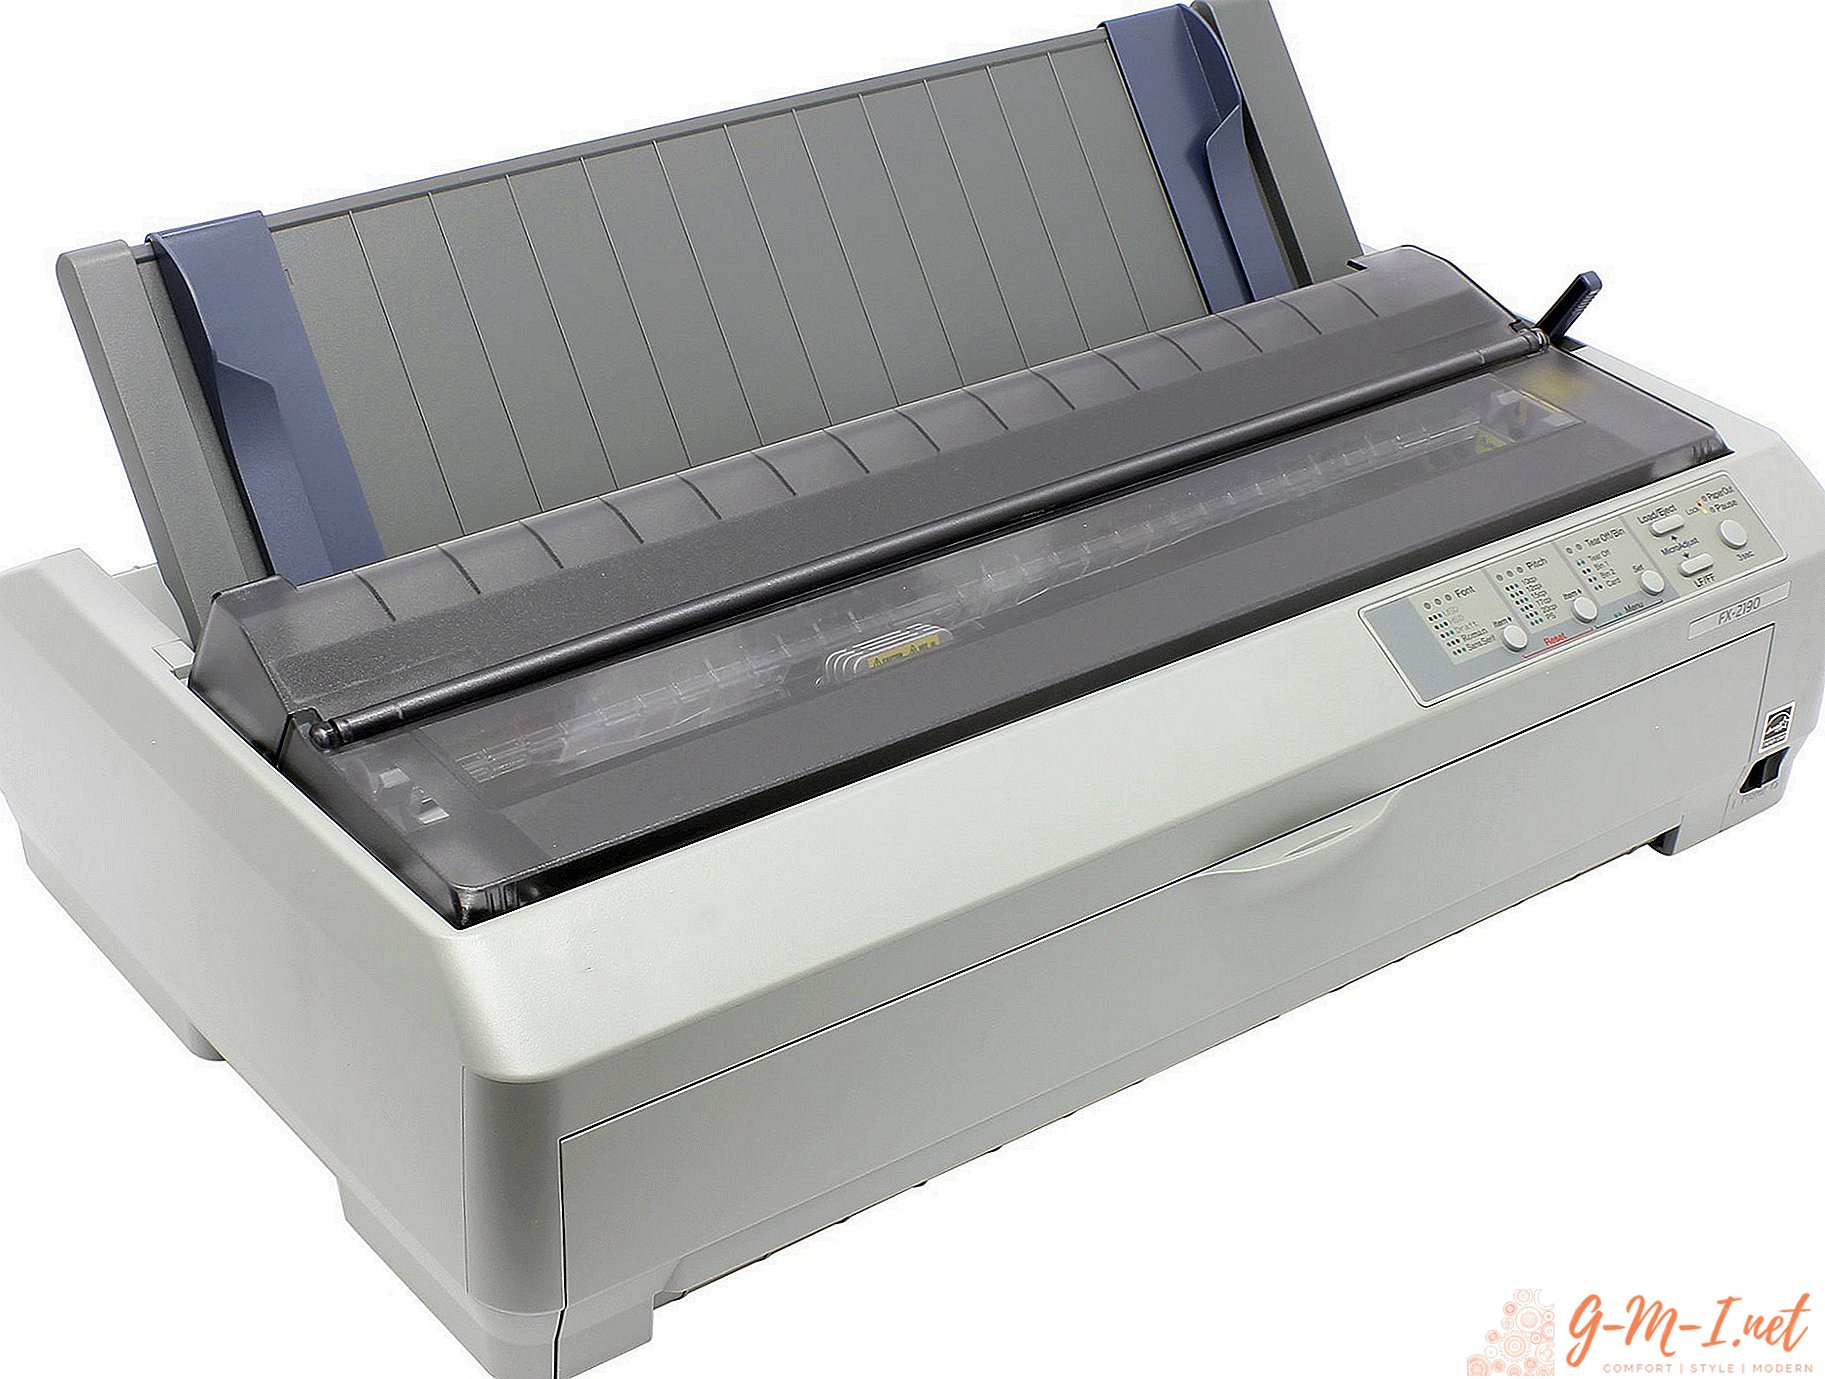 Pros and cons of dot matrix printers